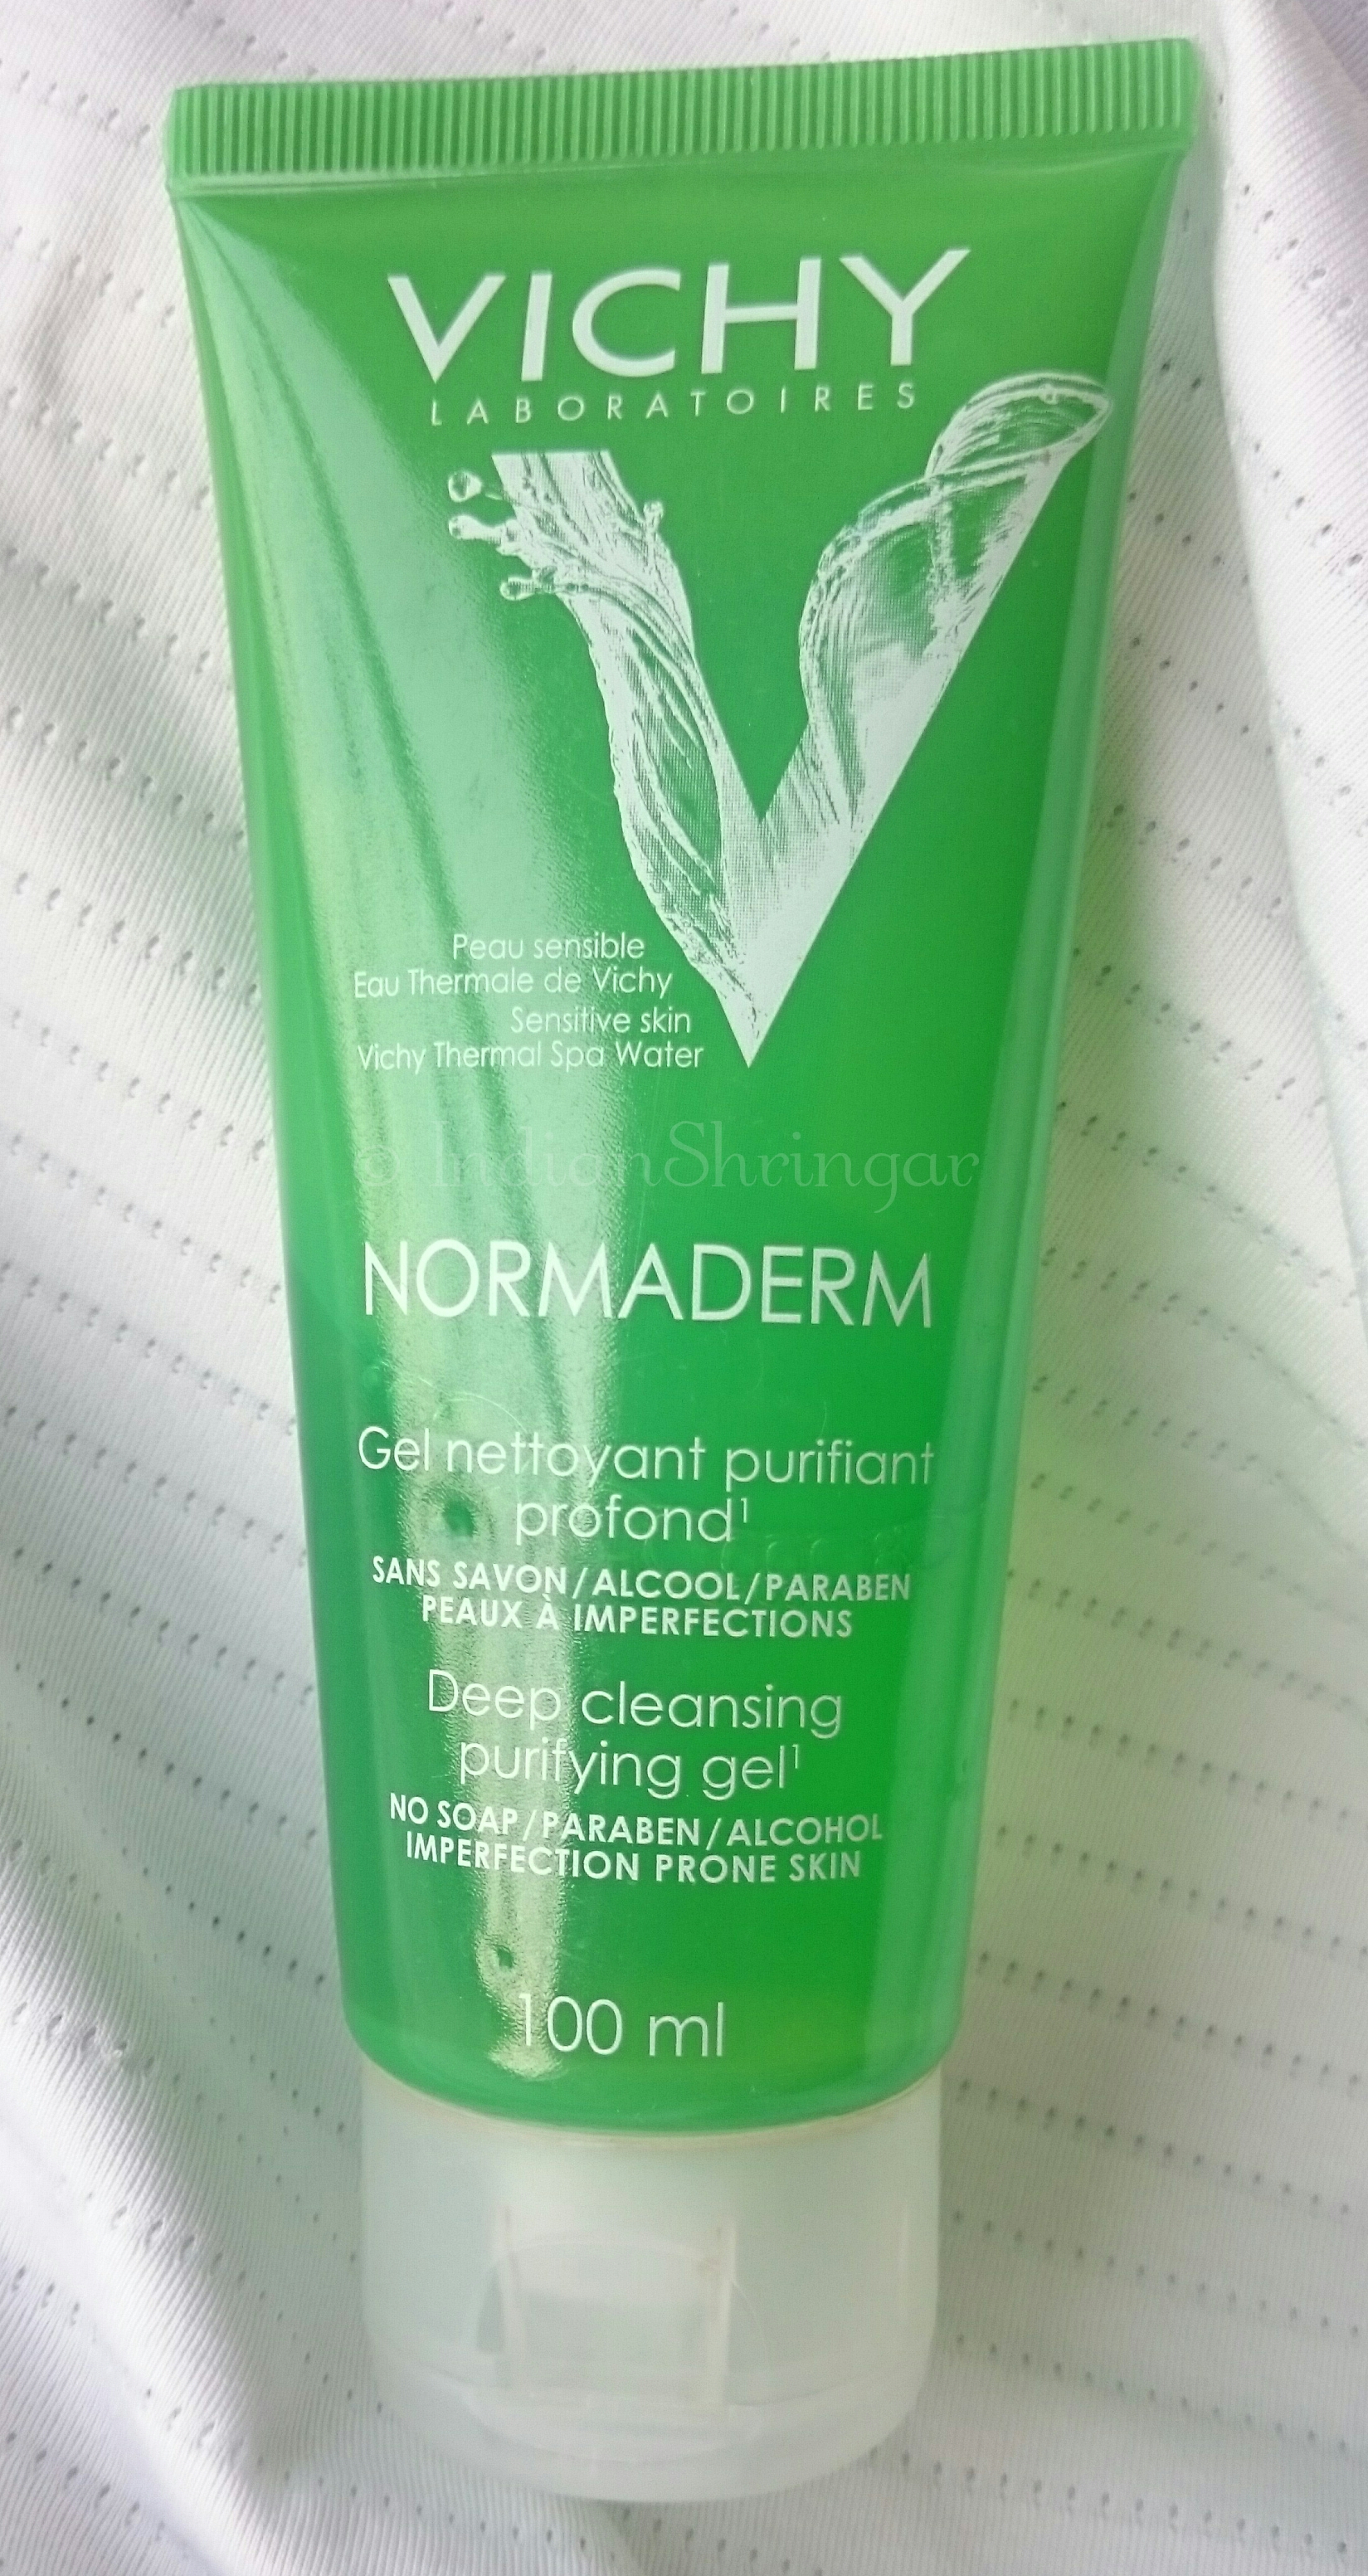 Vichy Normaderm Cleansing Gel review and price in India